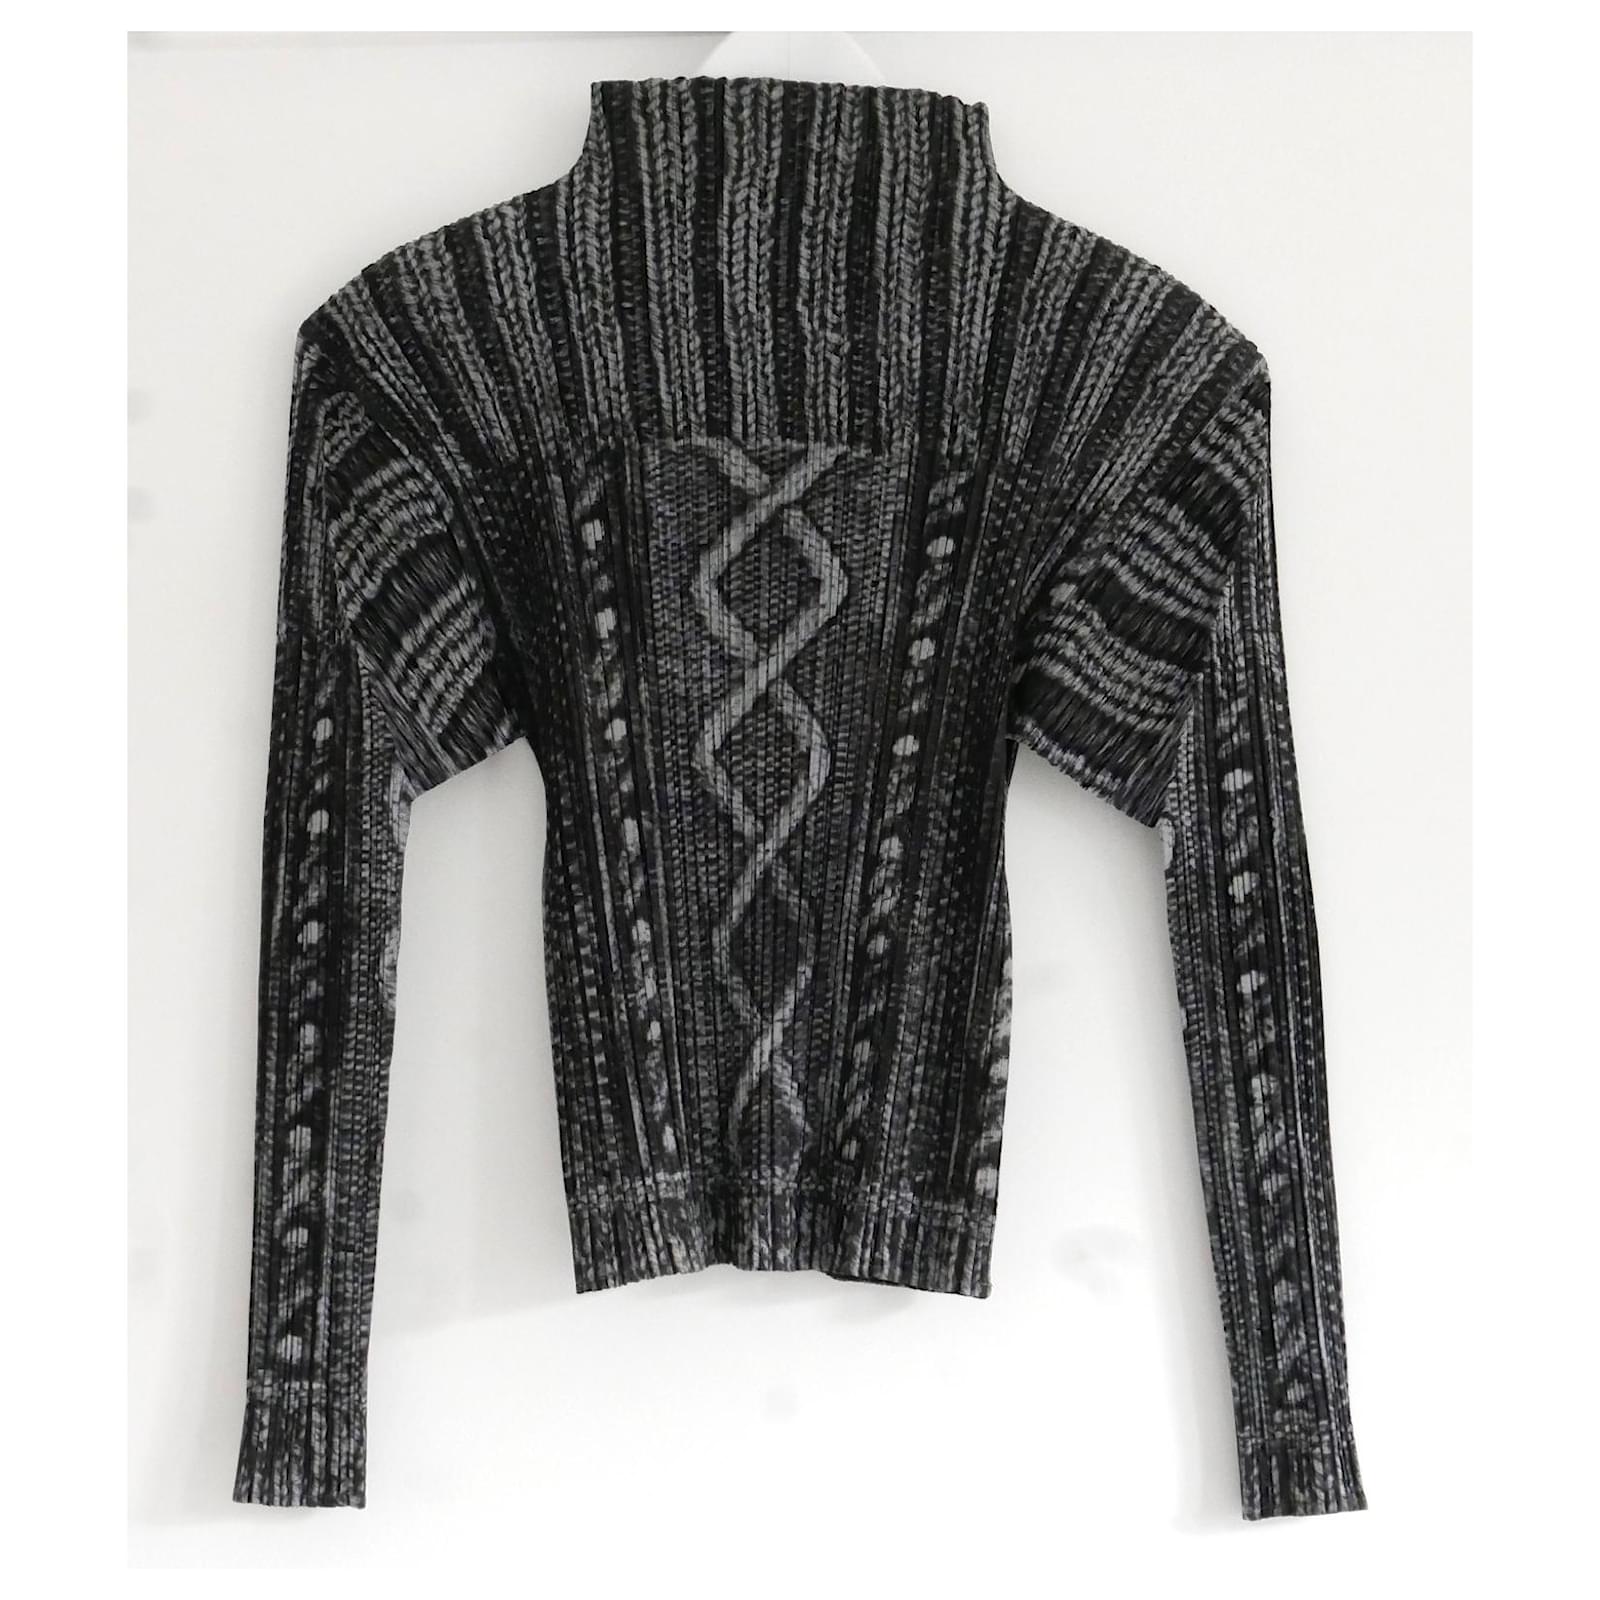 Issey Miyake Pleats Please Trompe L'oeil Cable Knit Print Top